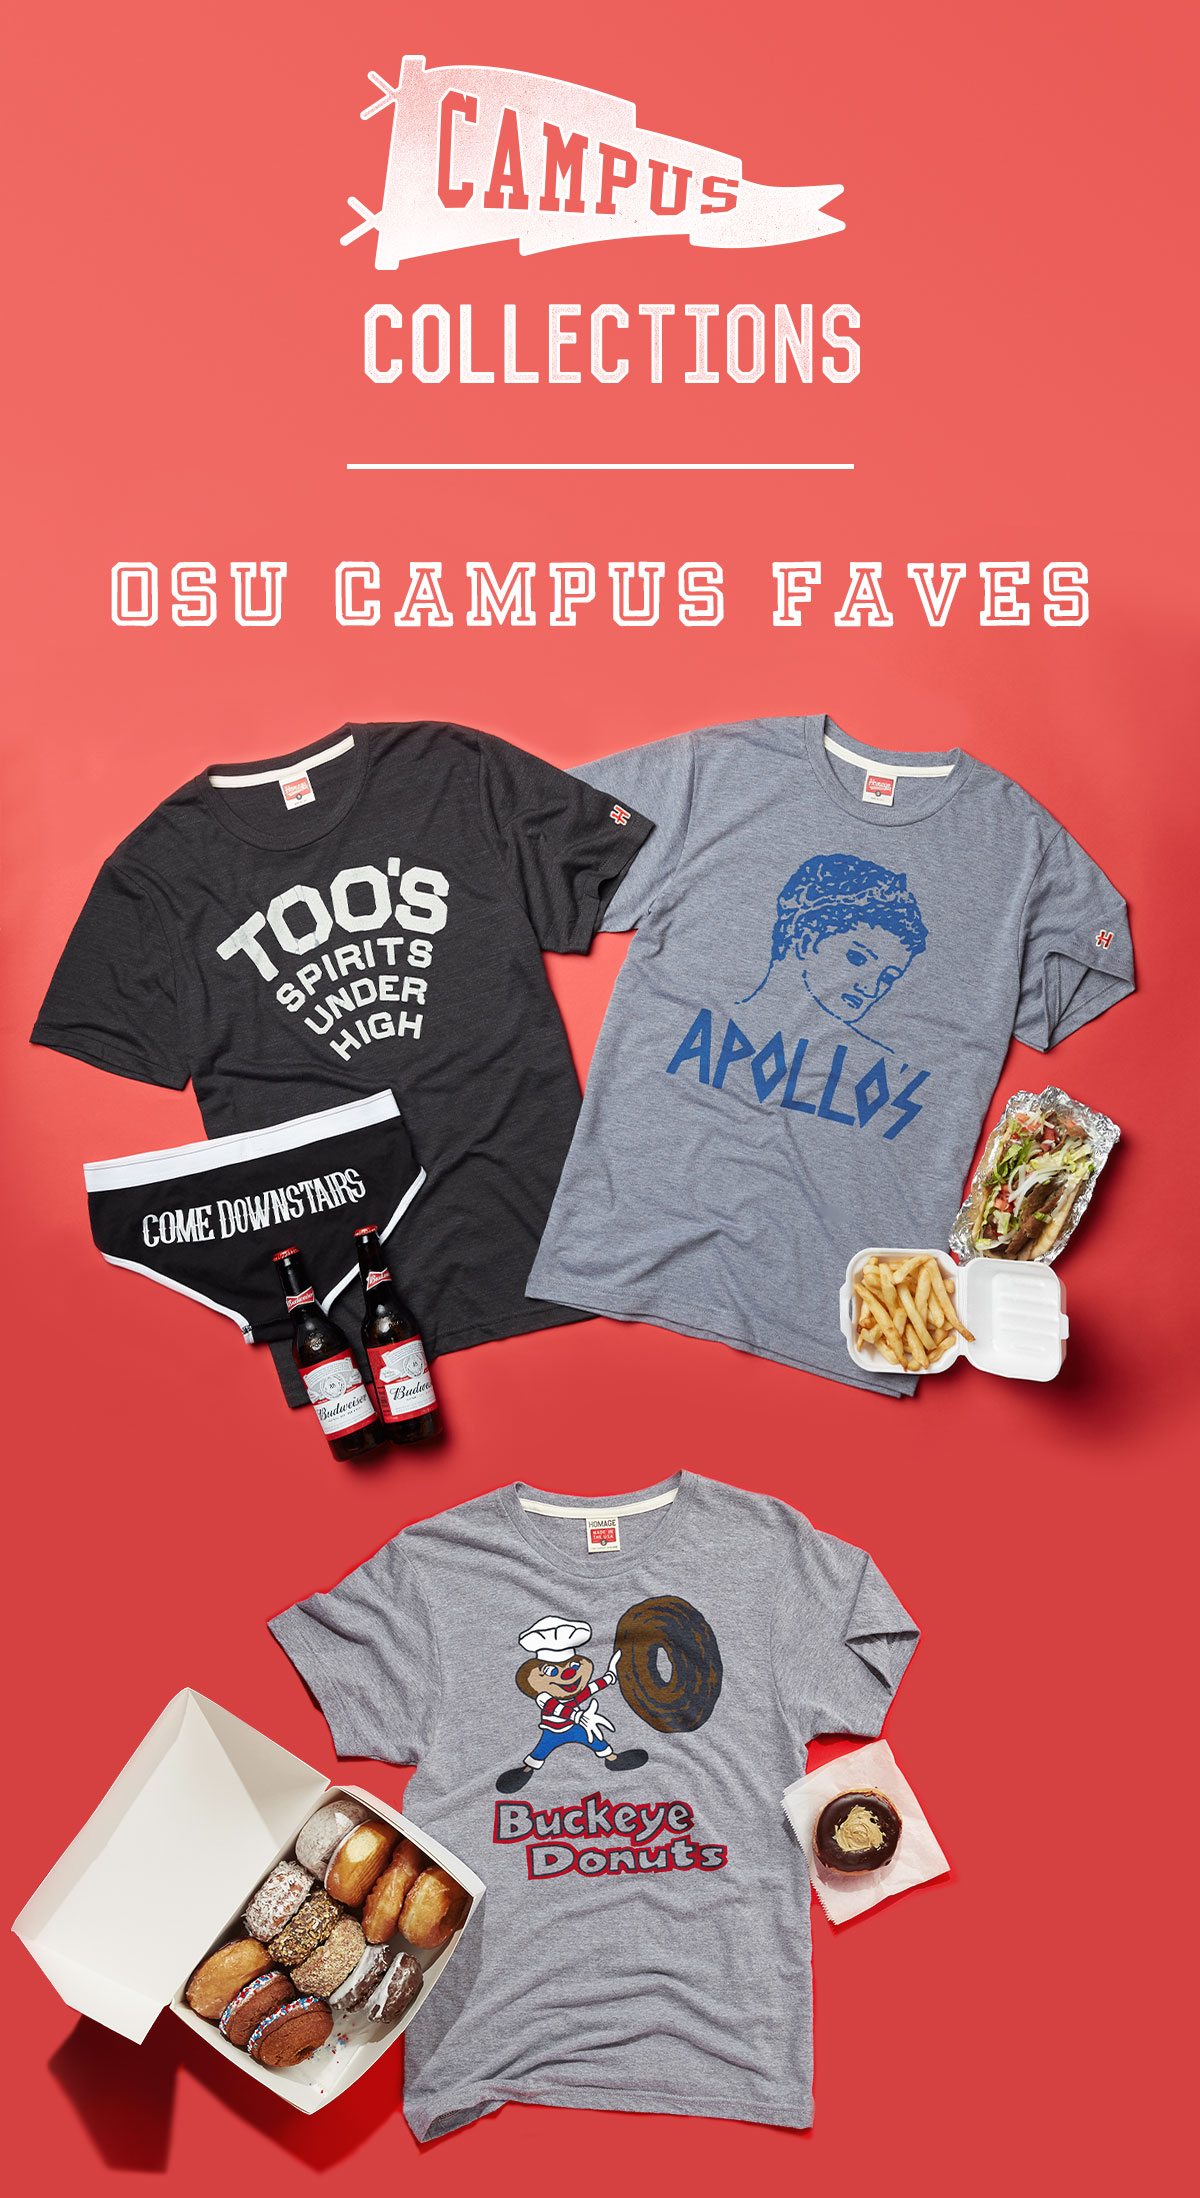 Campus Collections featuring OSU Campus Faves